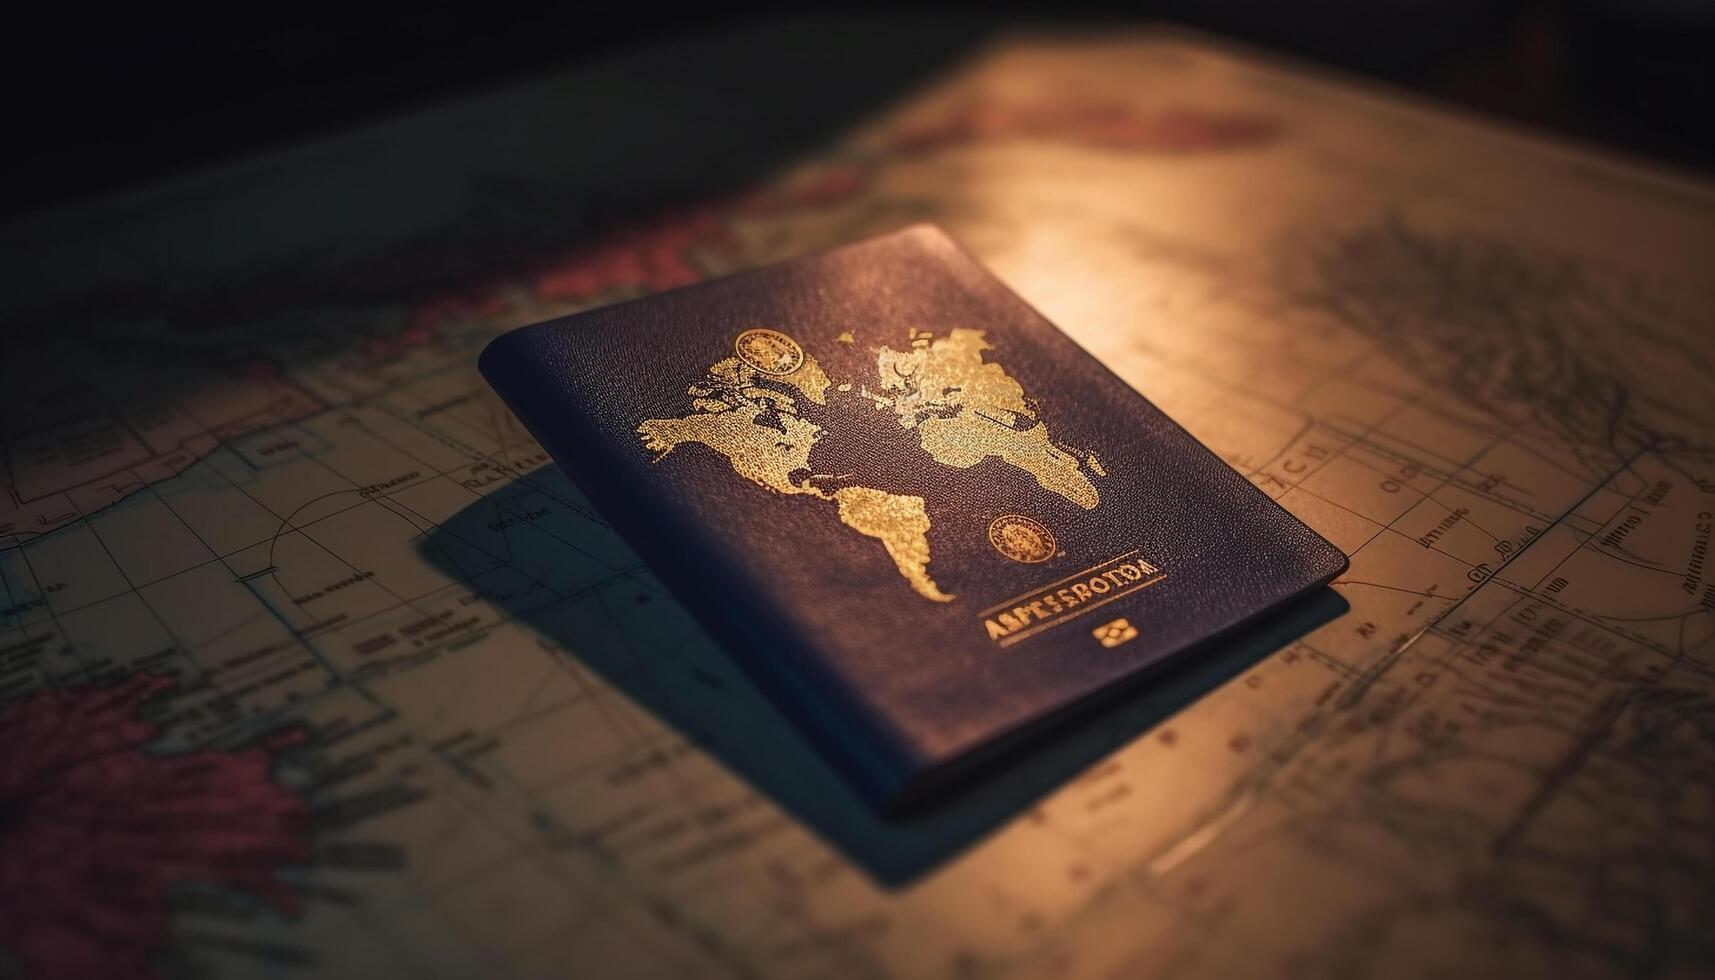 Explore the world with a vintage map and passport book generated by AI photo